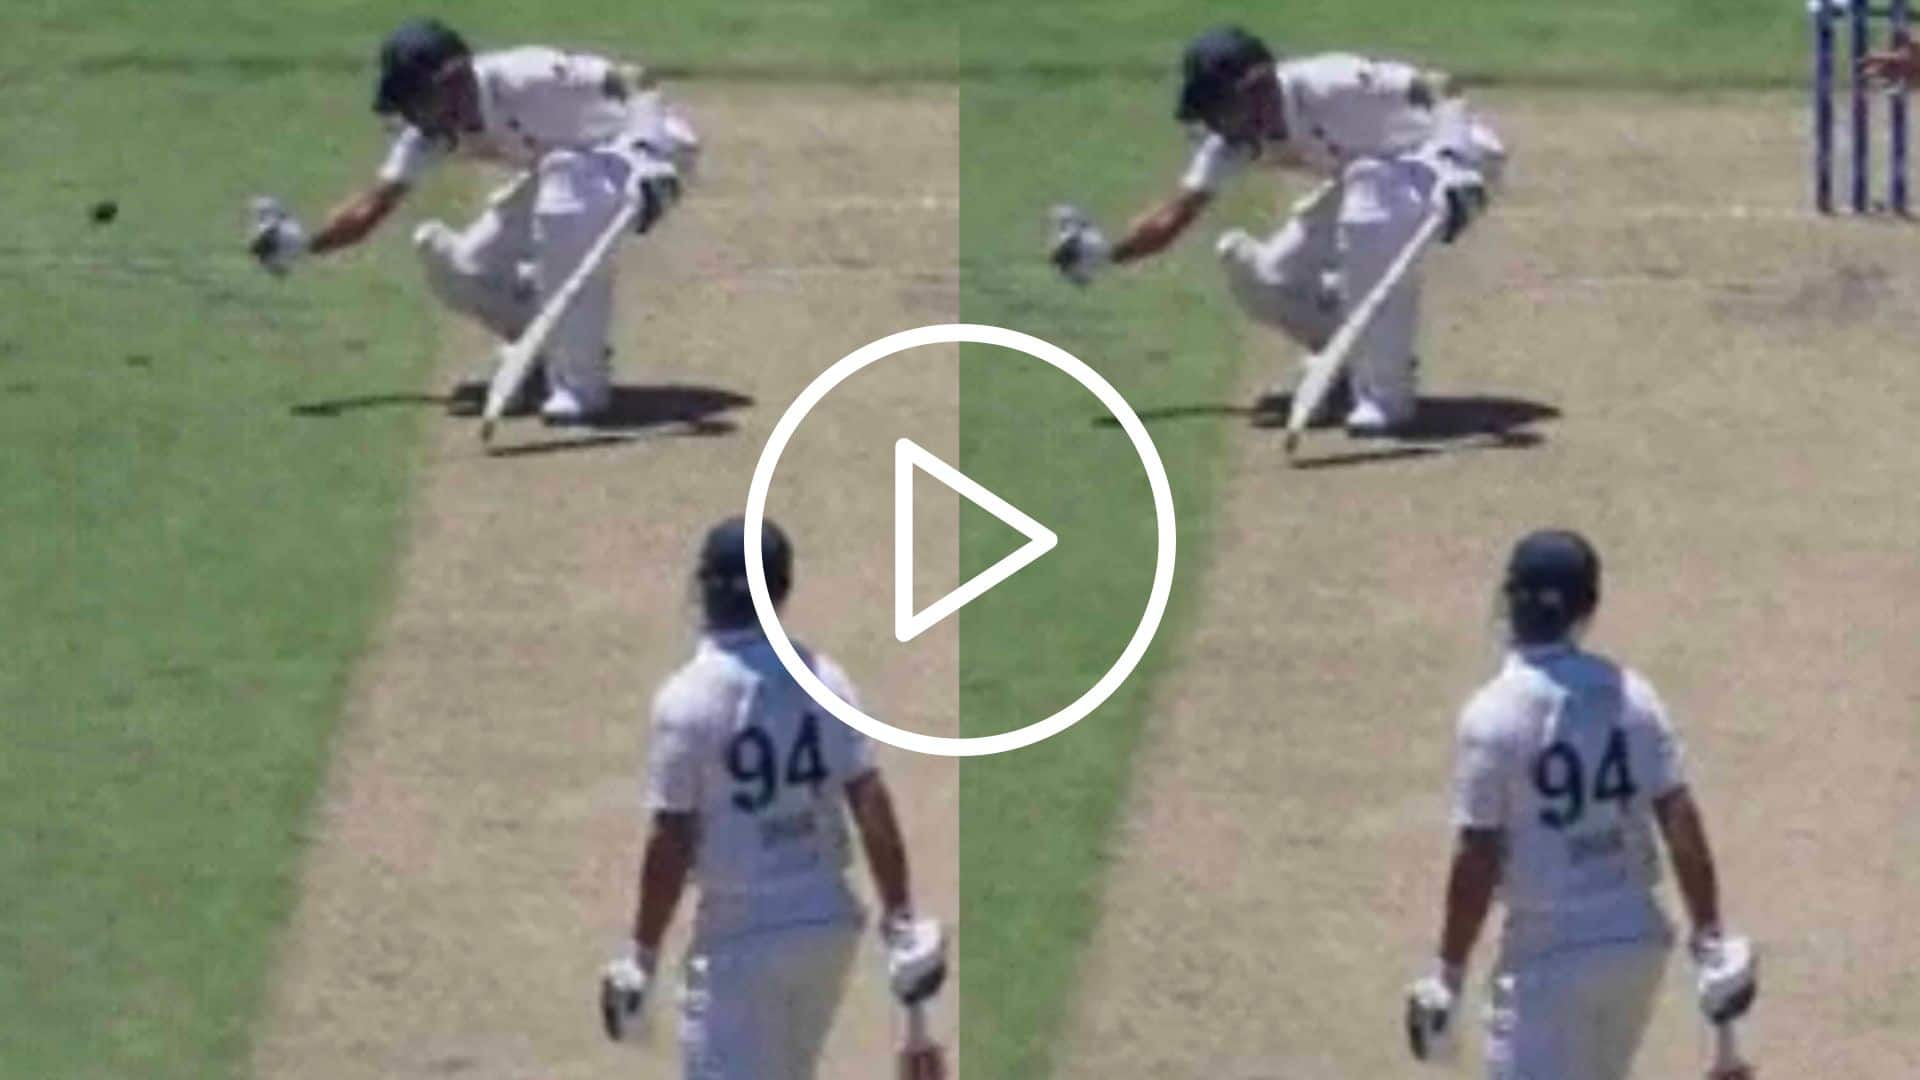 [Watch] Babar Azam Fields The Ball To Stop Masood's Boundary; Controversy Goes Viral